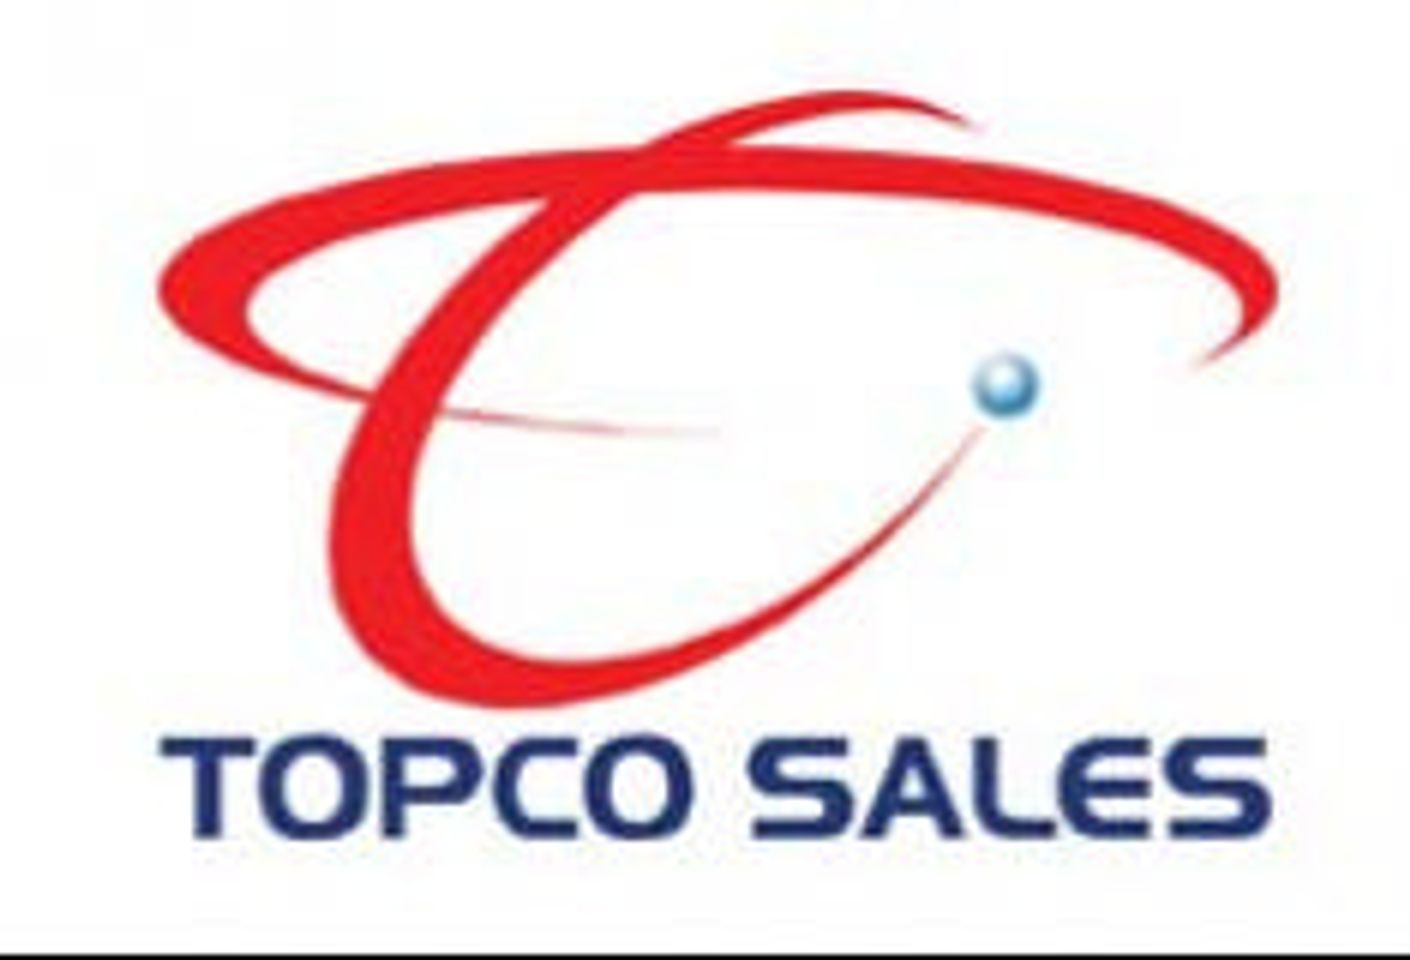 Topco Sales Honored